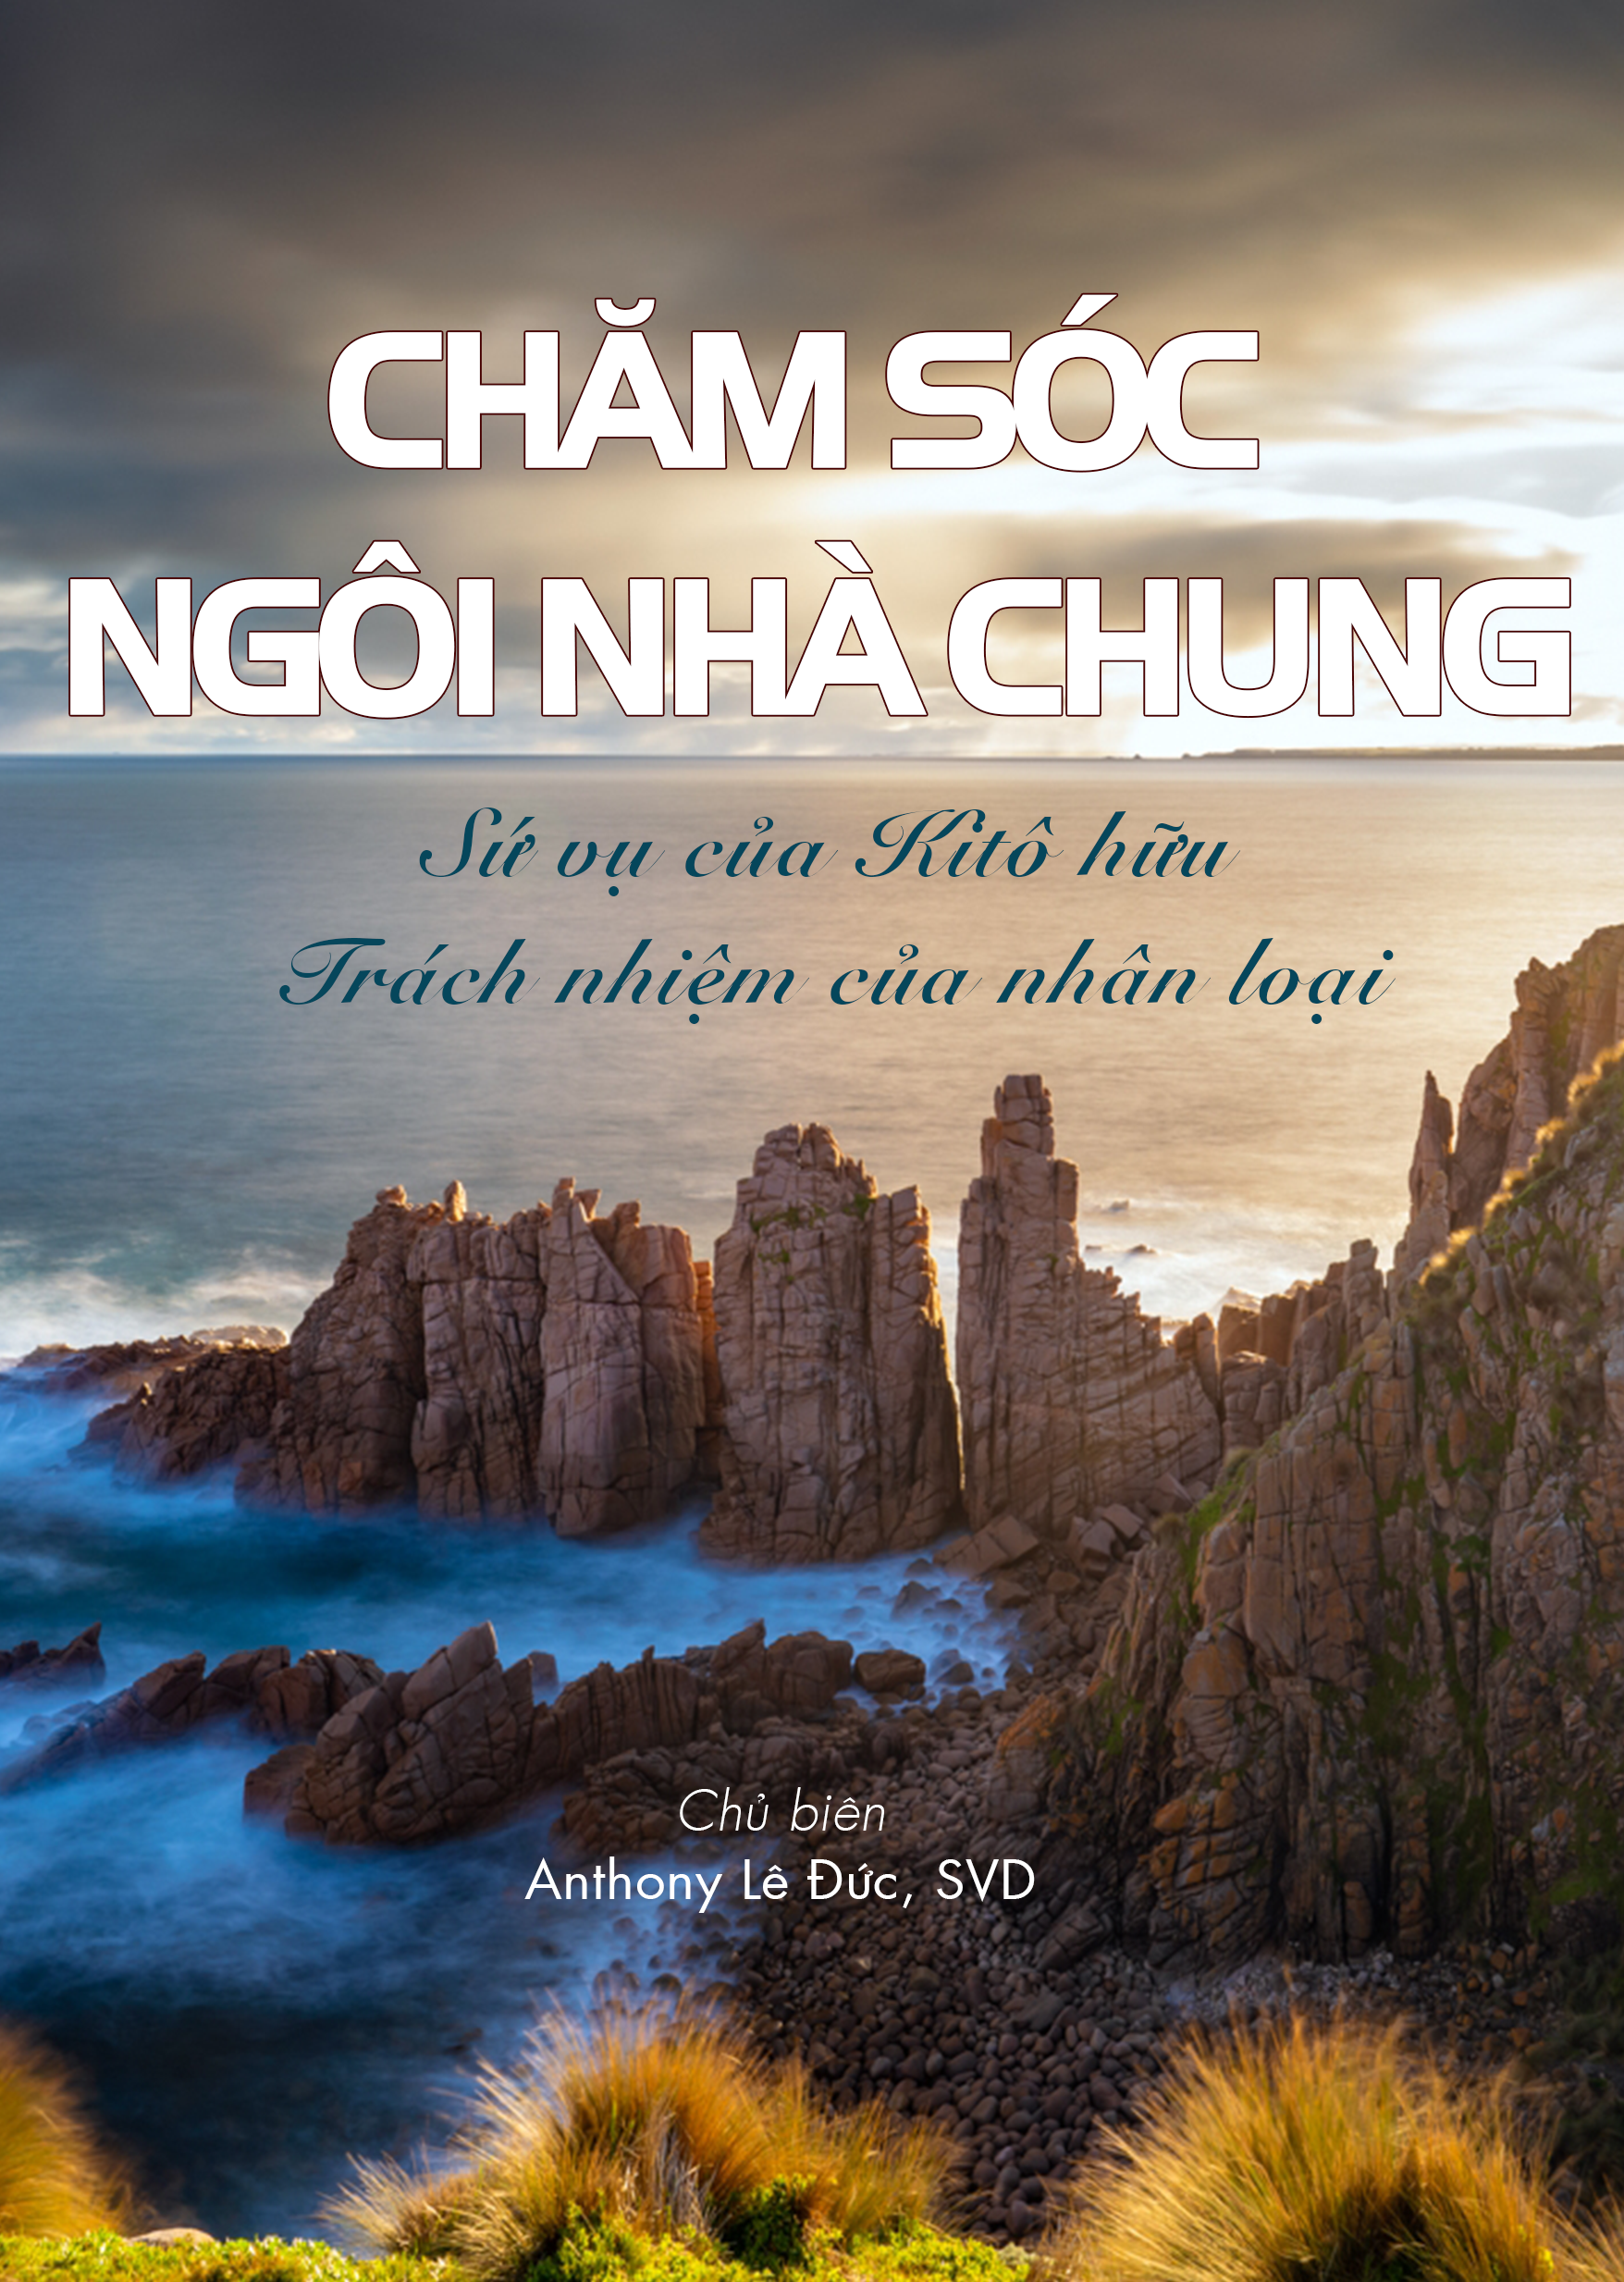 cham-soc-ngoi-nha-chung-front-cover-1708051943.png